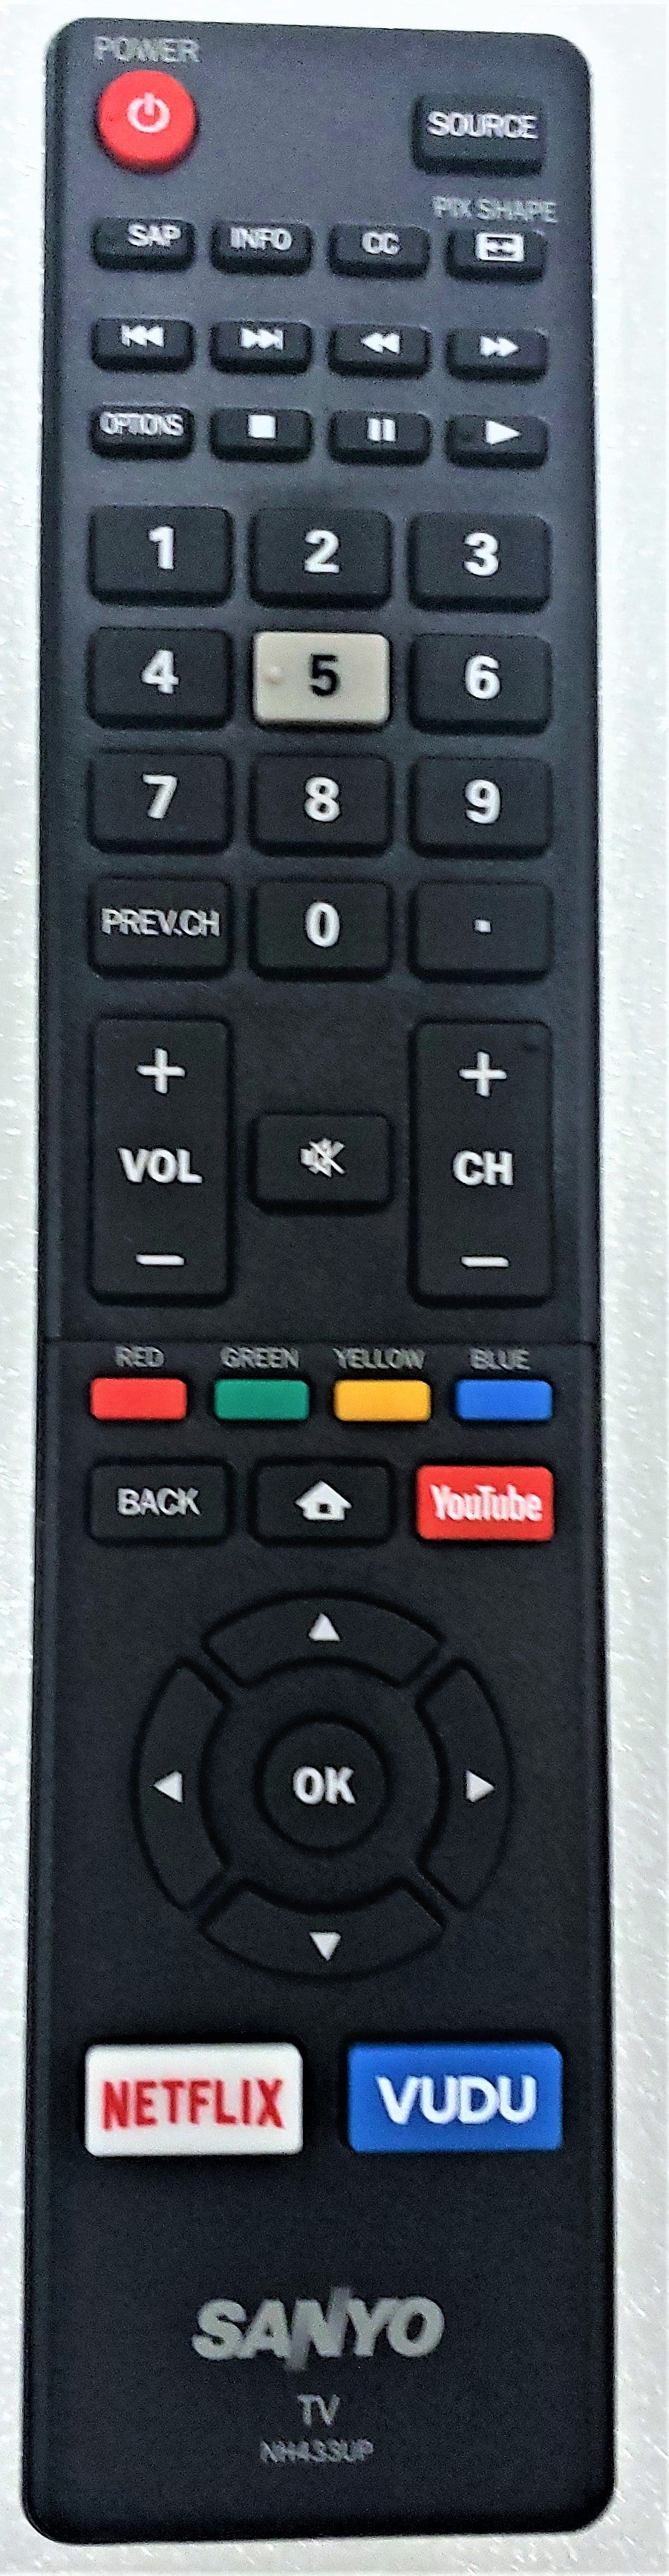 OEM replacement remote control for Sanyo LED/LCD TV NH433UP